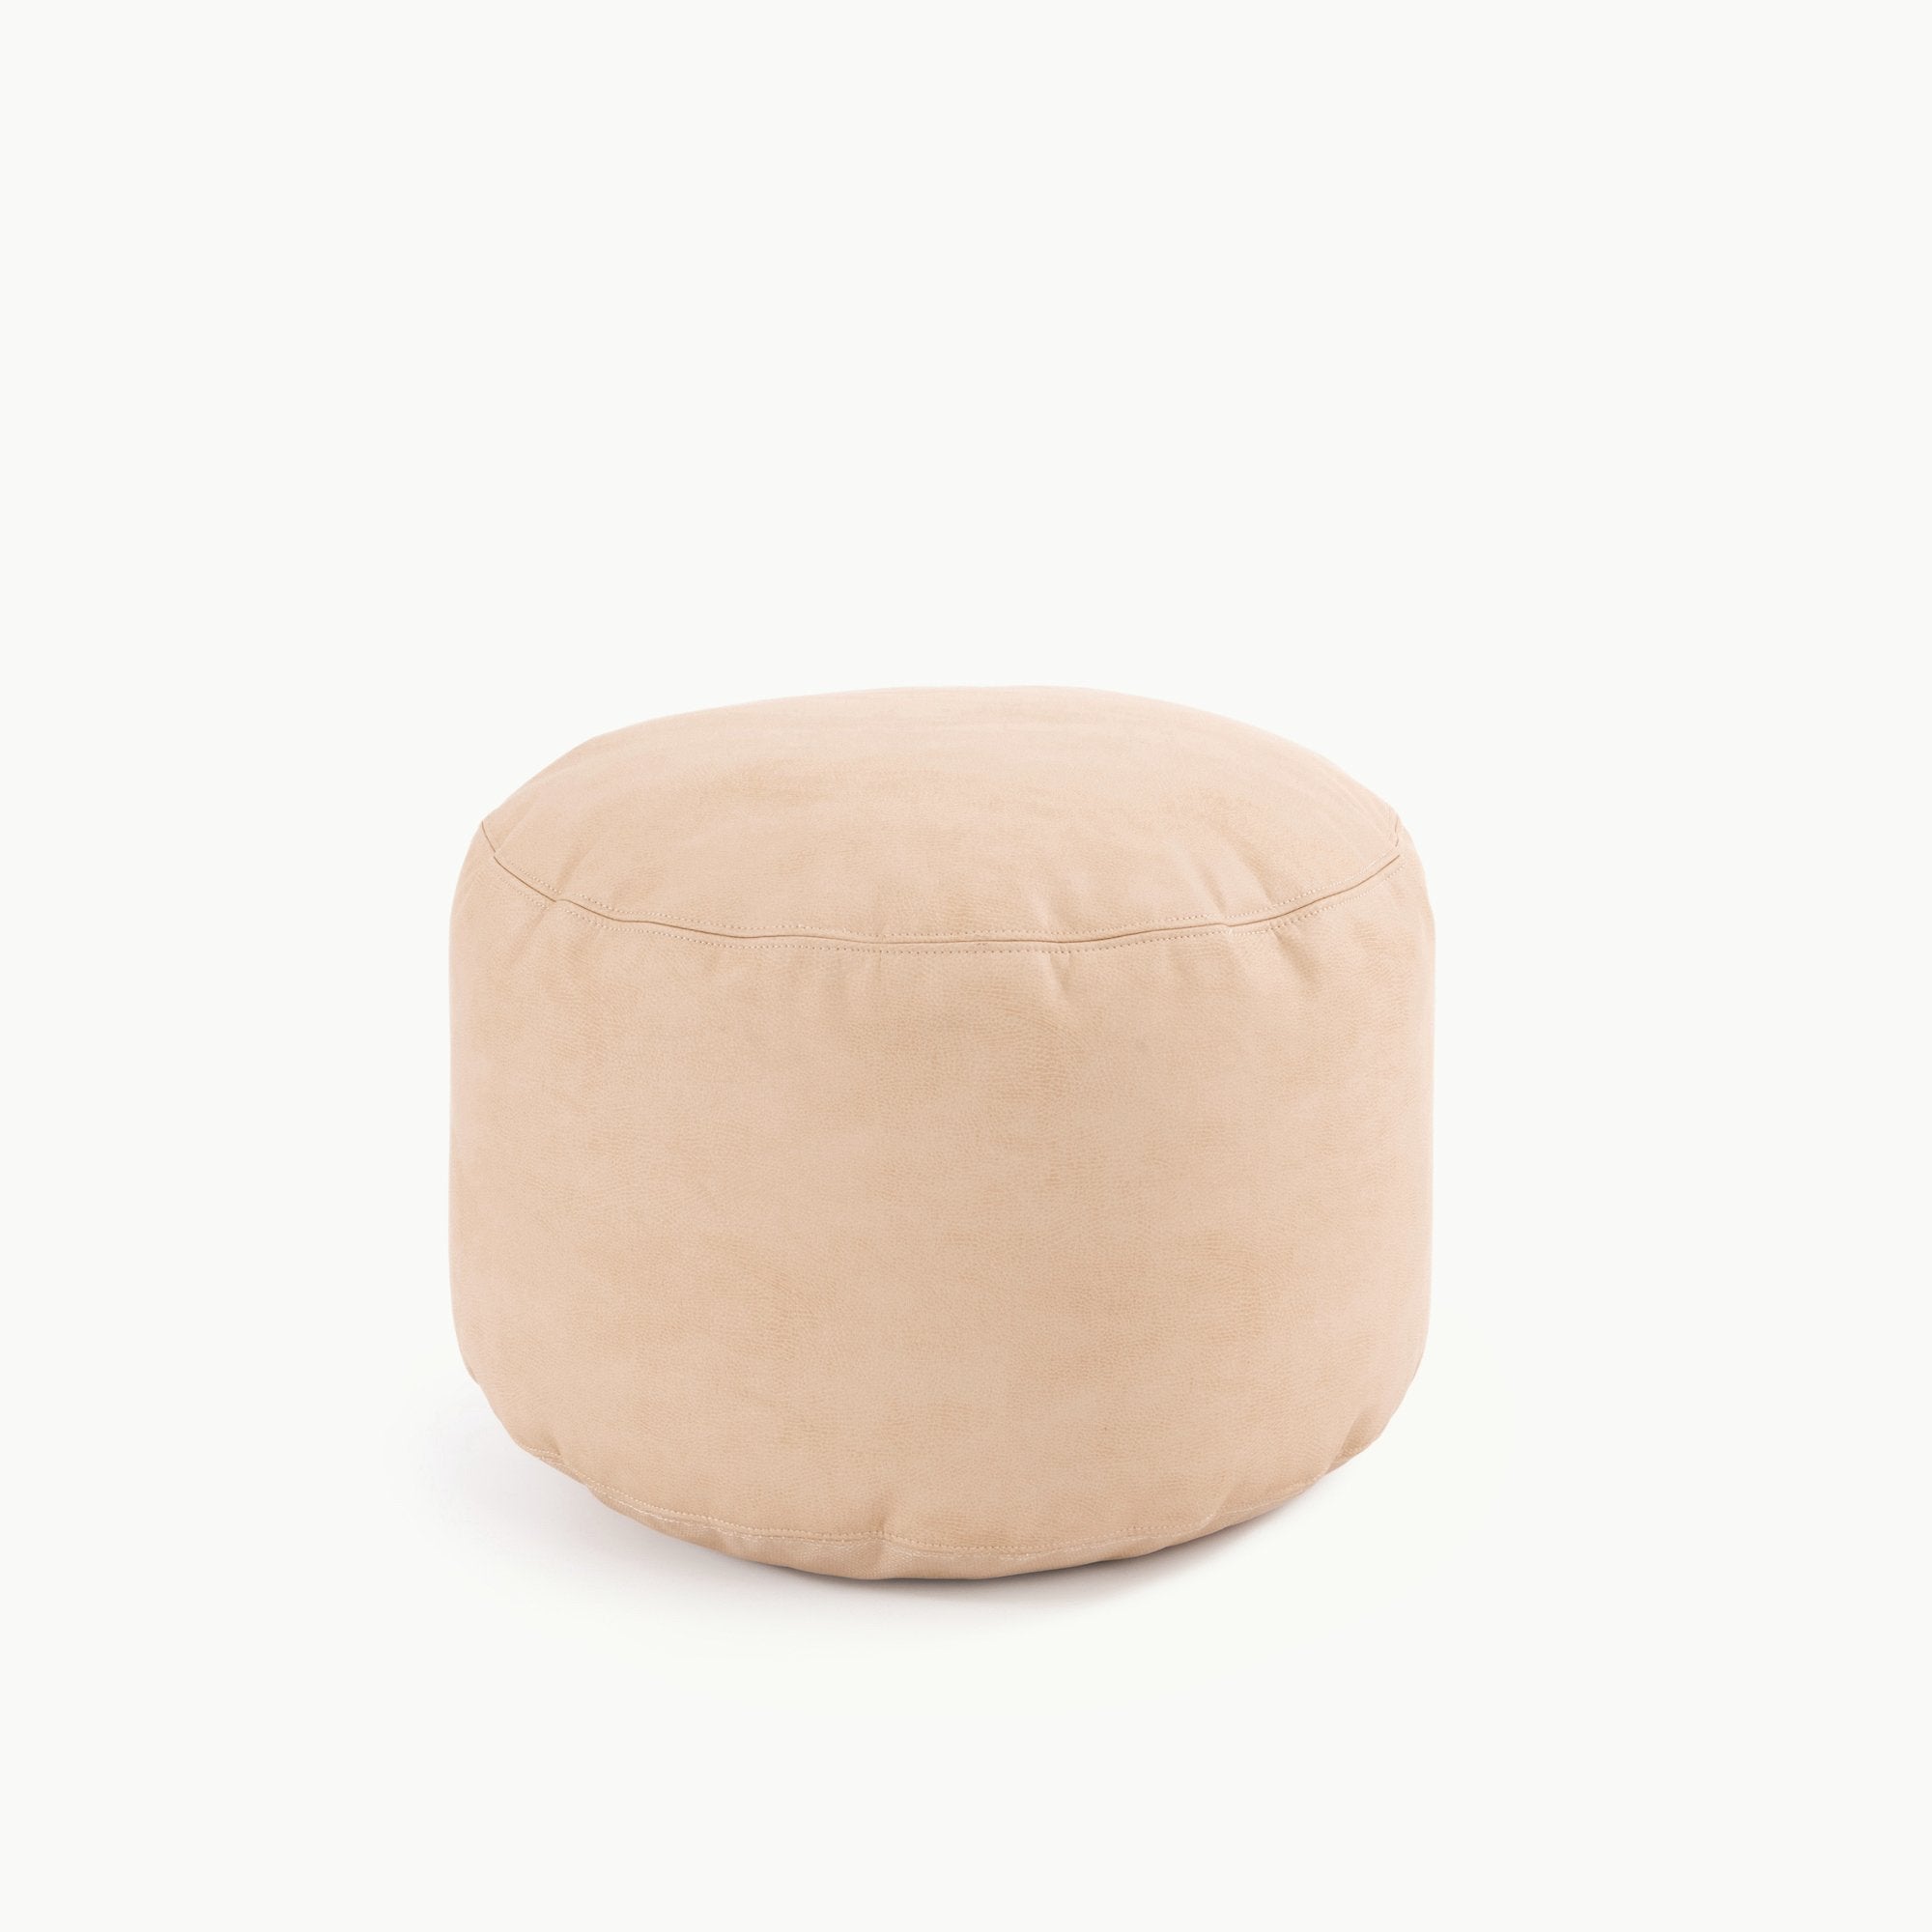 Untanned (on sale) / Circle@Untanned Circle Pouf